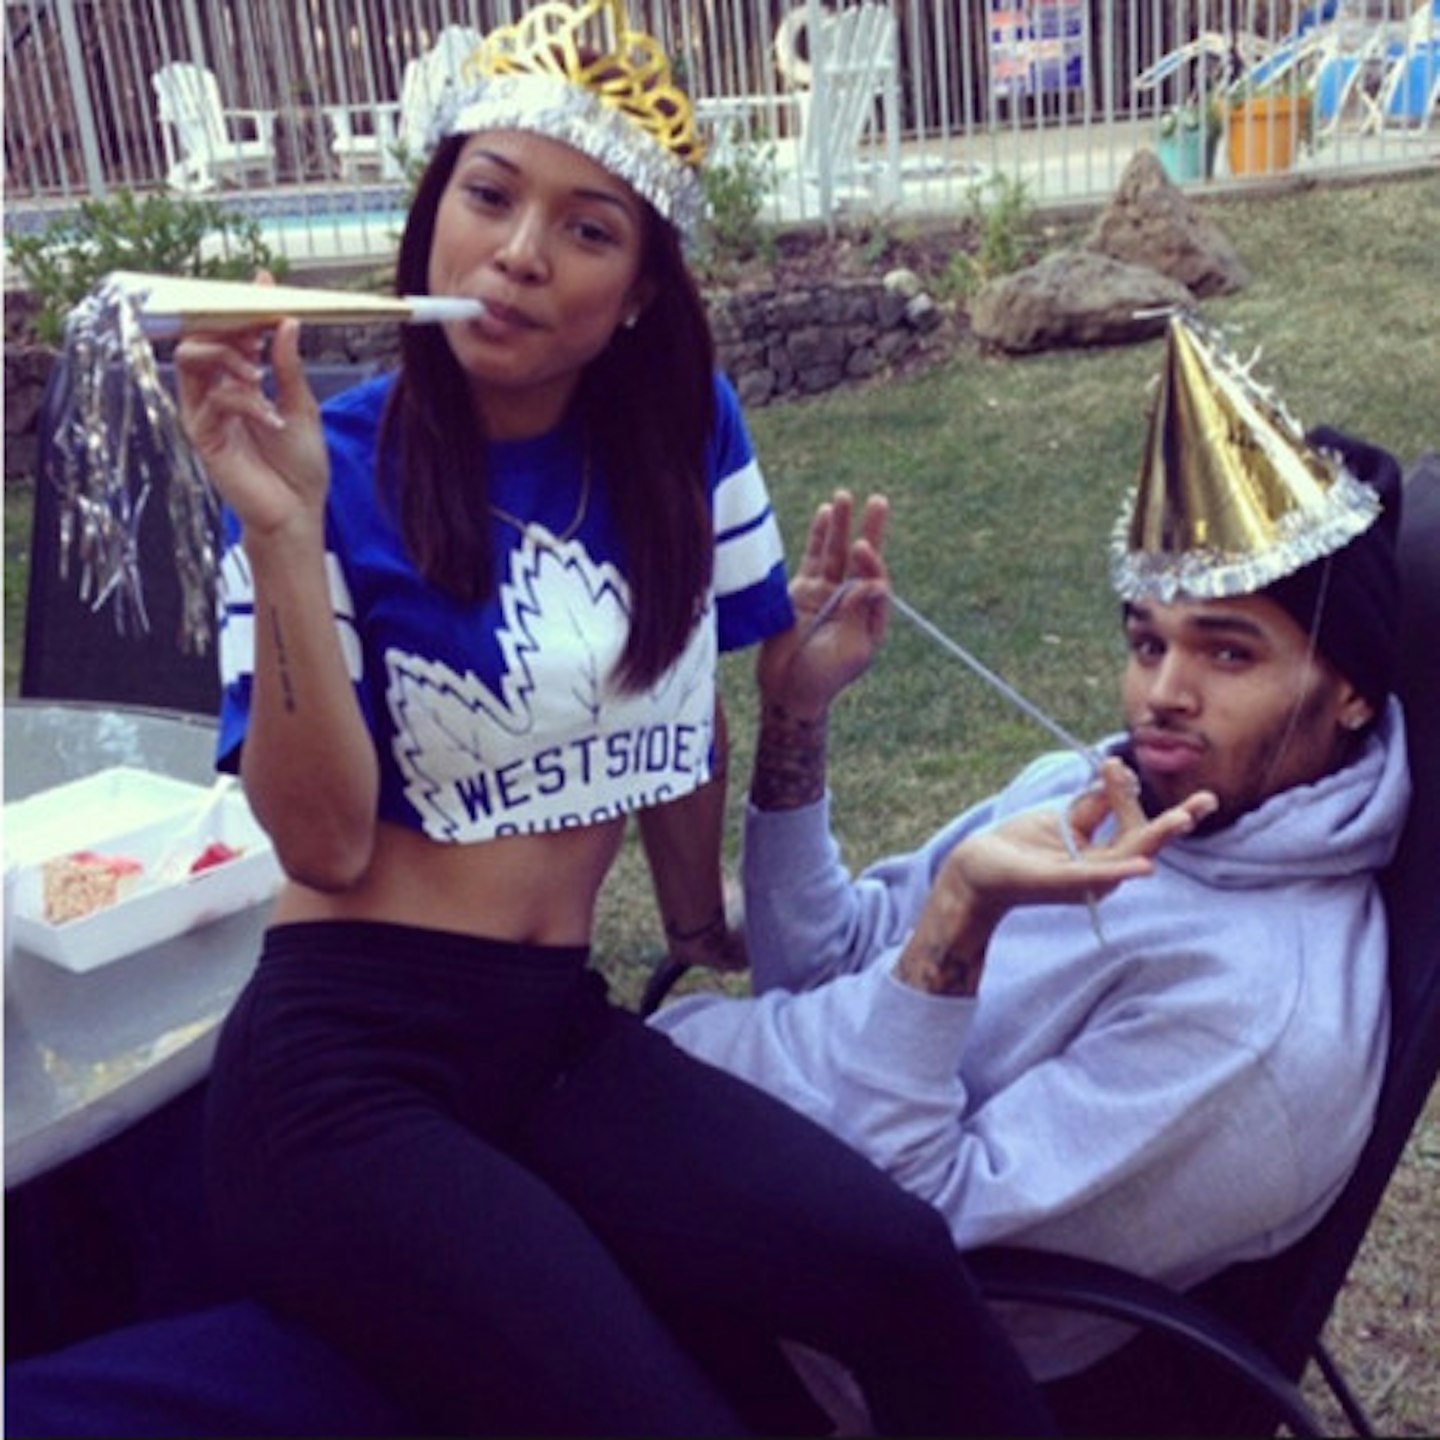 Karrueche and Chris have dated on/off for several years